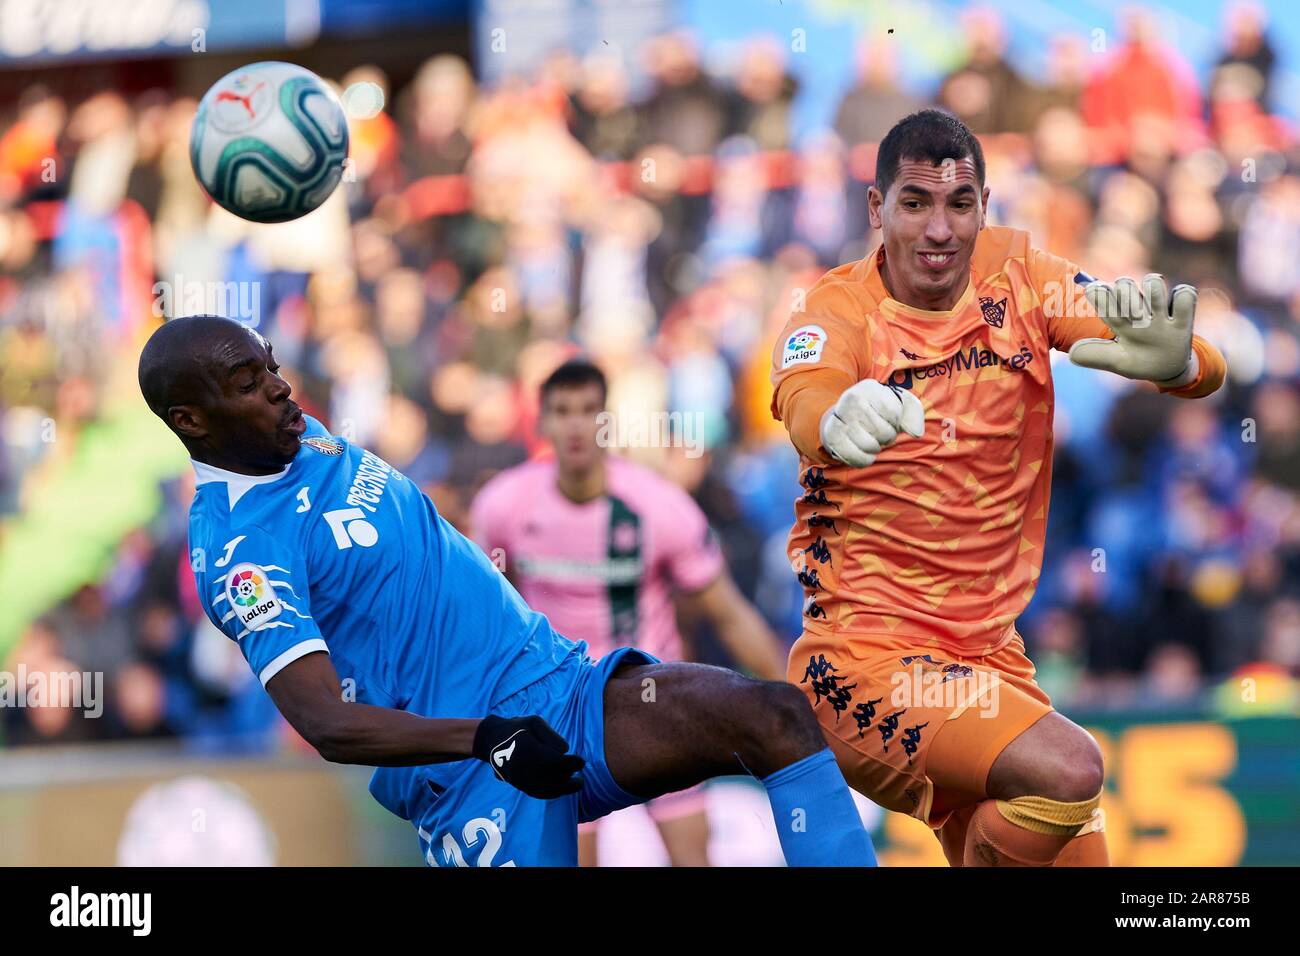 Allan-Romeo Nyom of Getafe FC and Joel Robles of Real Betis Balompie are seen in action during the La Liga match between Getafe CF and Real Betis Balompie at Coliseum Alfonso Perez in Getafe. (Final score; Getafe CF 1:0 Real Betis Balompie) Stock Photo